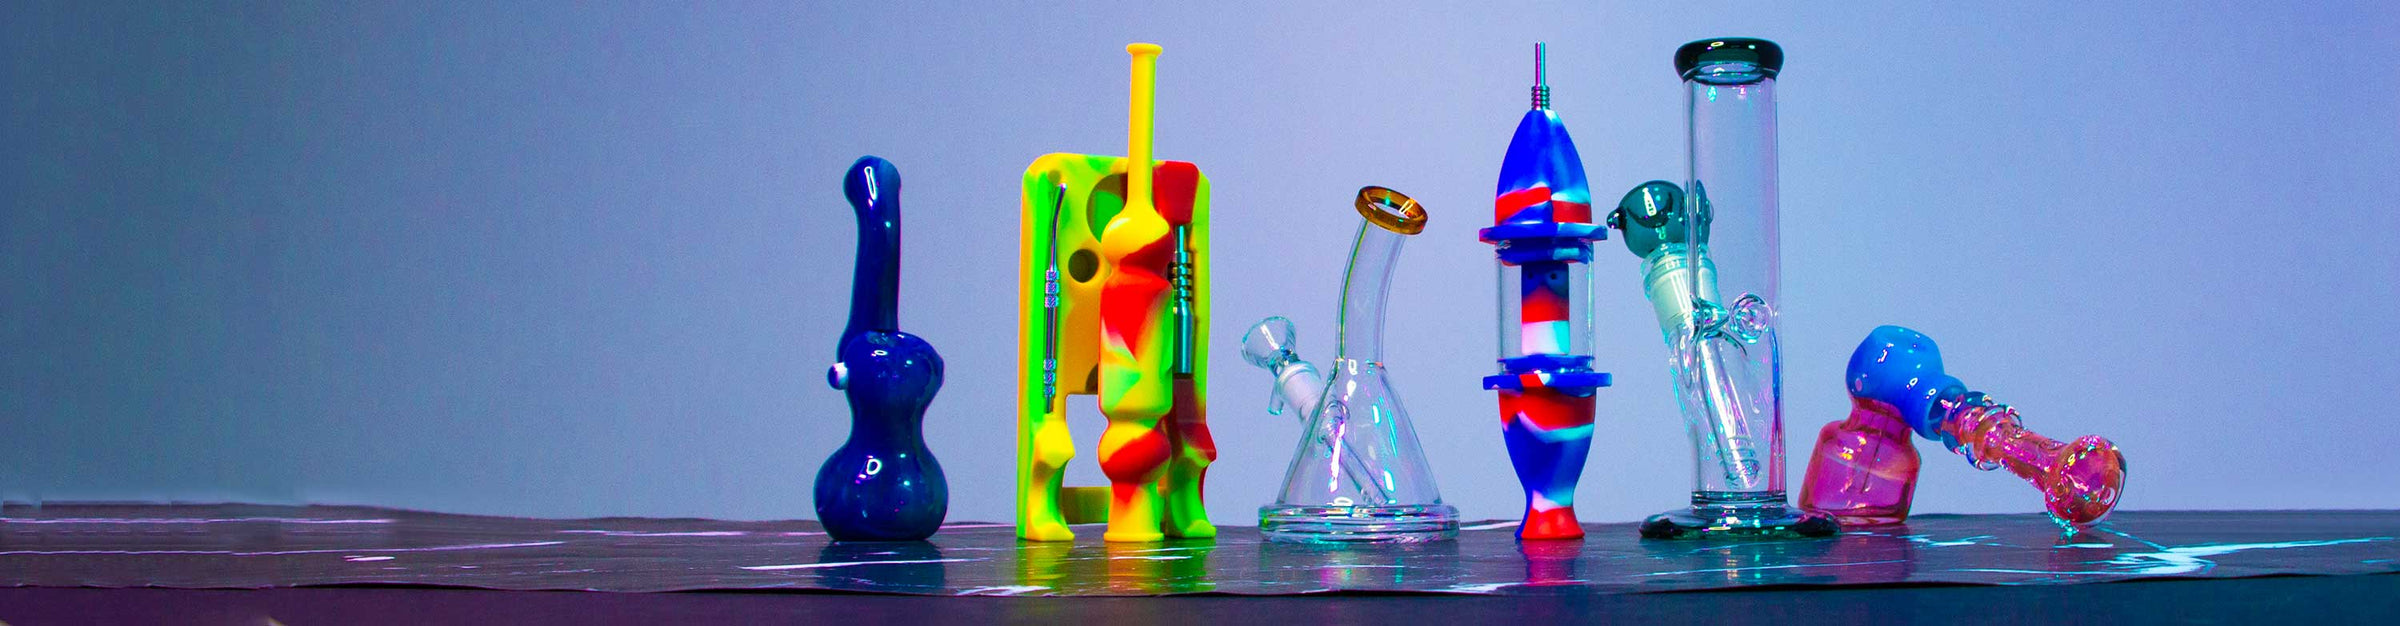 Got Vape Retail Glass and Silicone products standing on marble textured table inside studio with blue and purple lighting